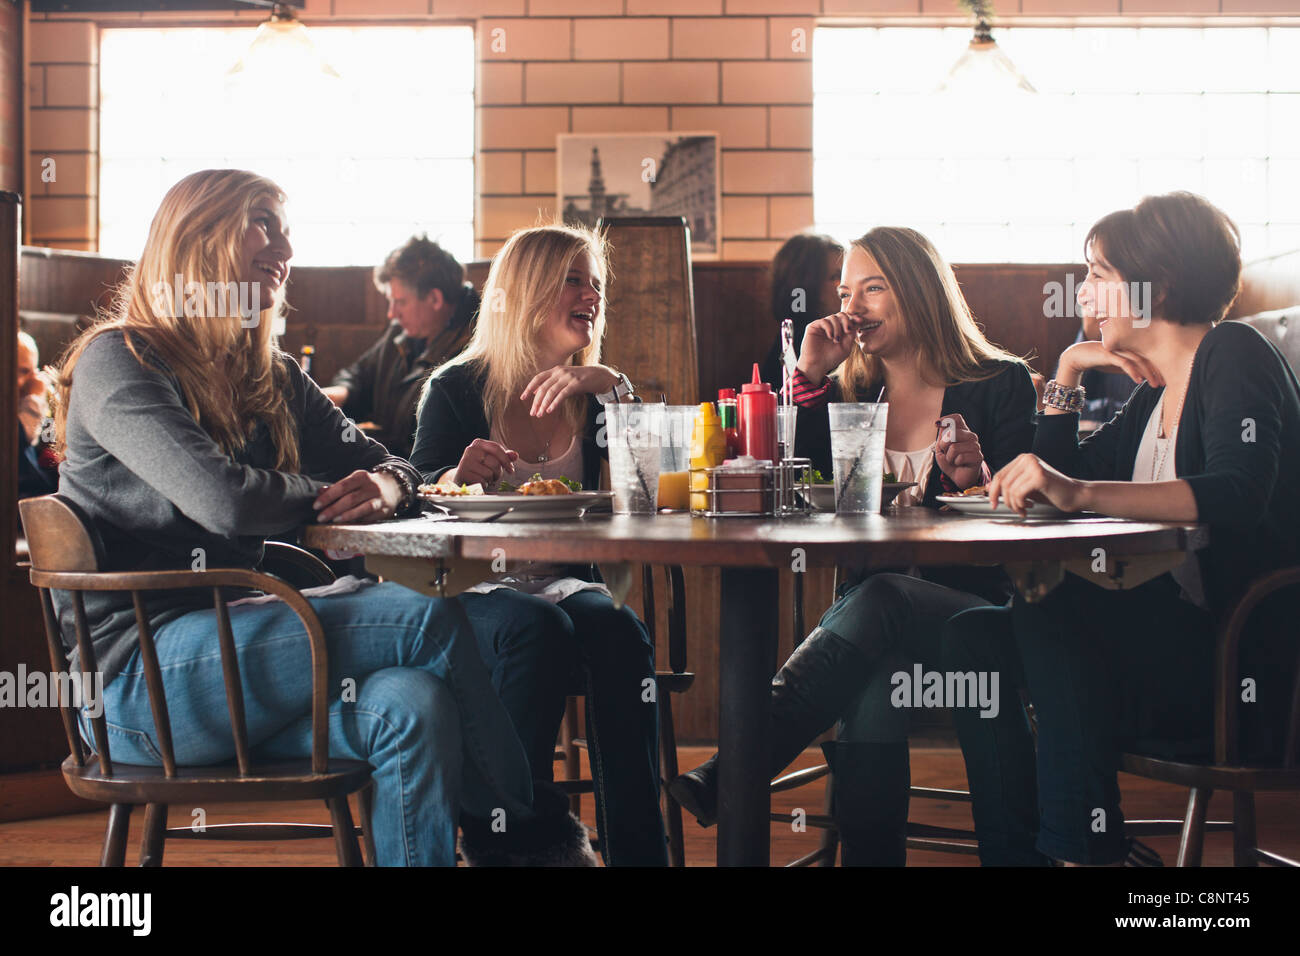 Caucasian teenagers eating together in restaurant Stock Photo